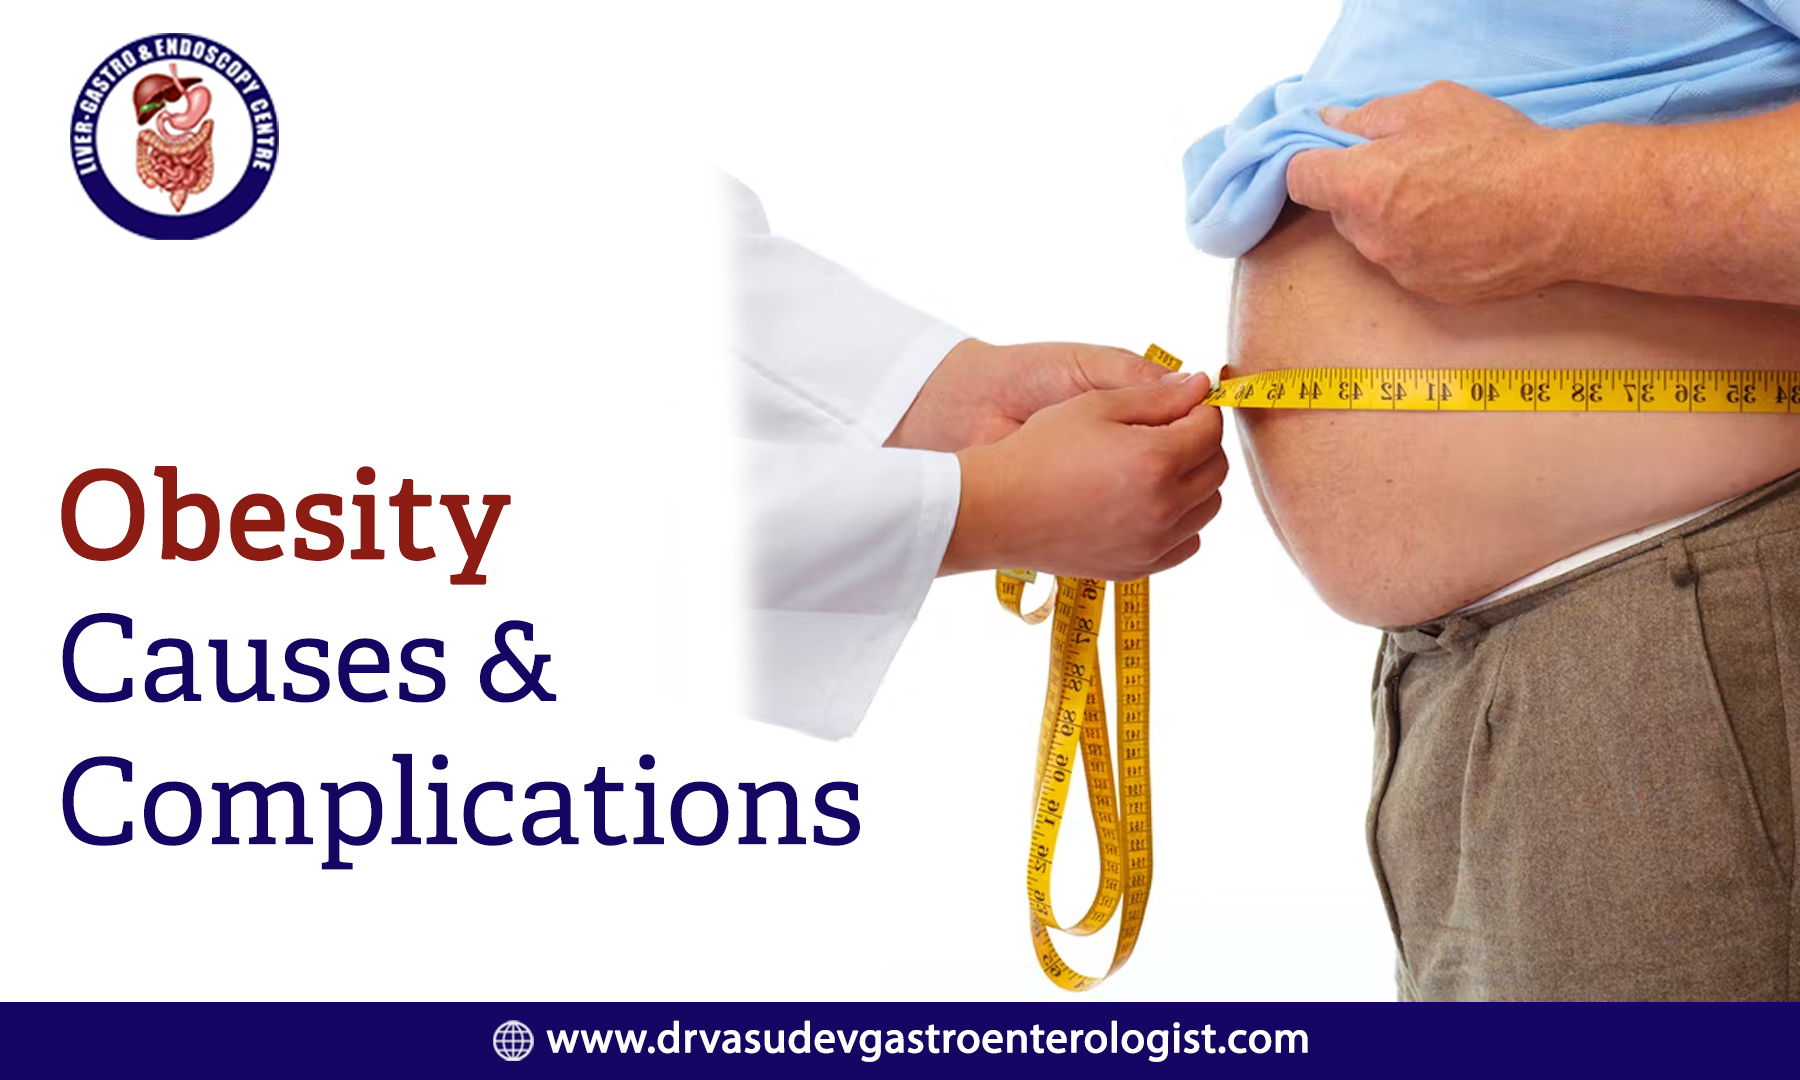 Obesity Causes & Complications: